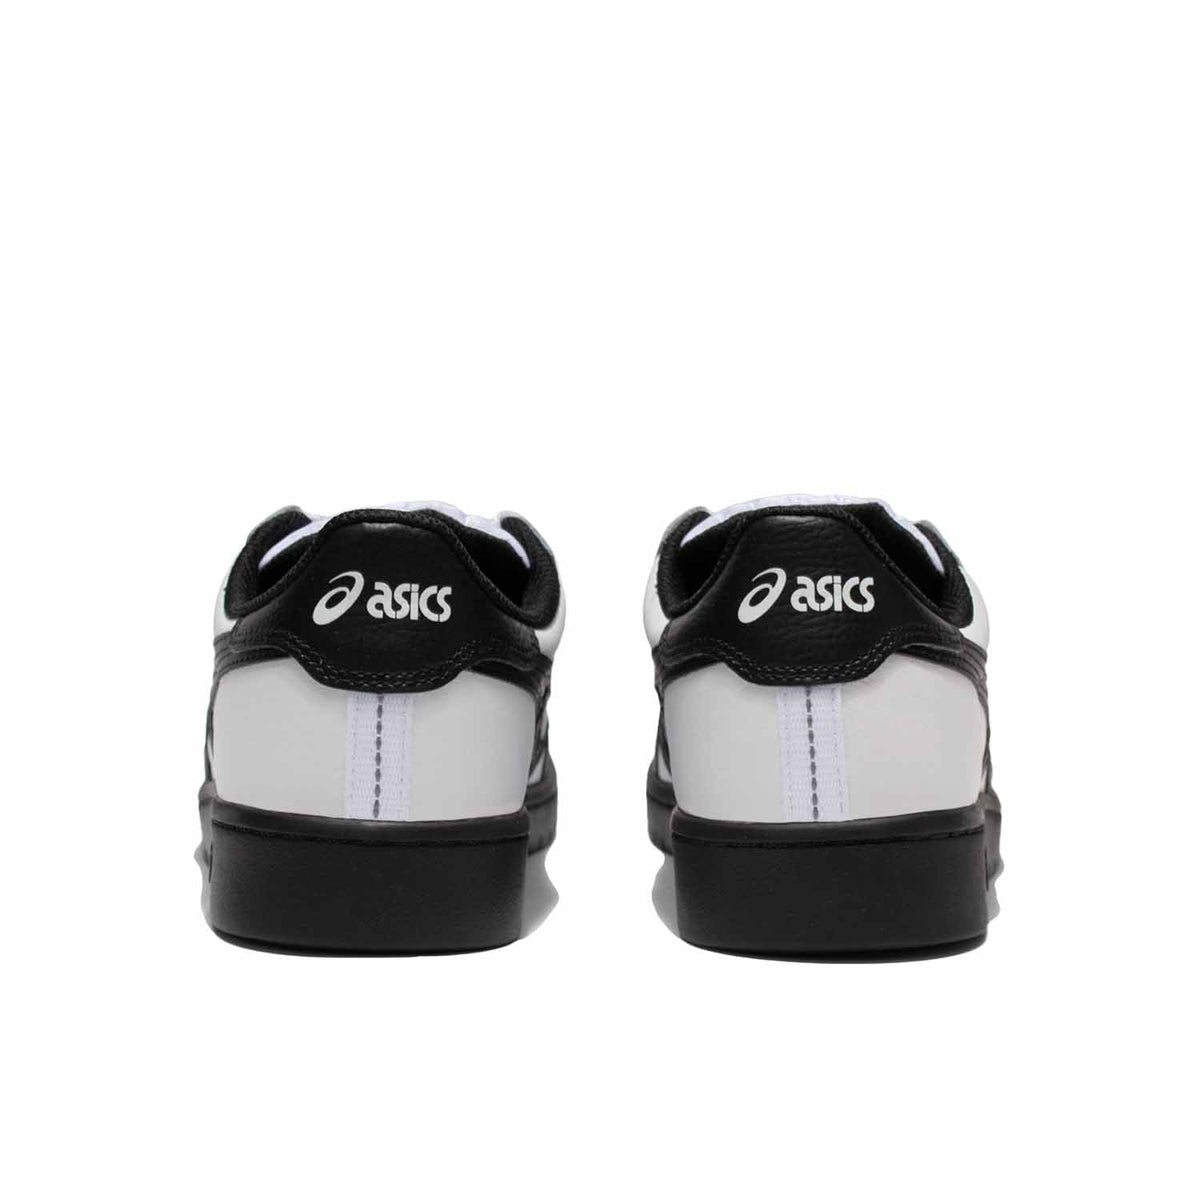 Heel photo of Asics Japan Pro shoe, all white with black heel, black asics logo, and black sole. Back of heel has leather detailing with asics in white on Black leather. 